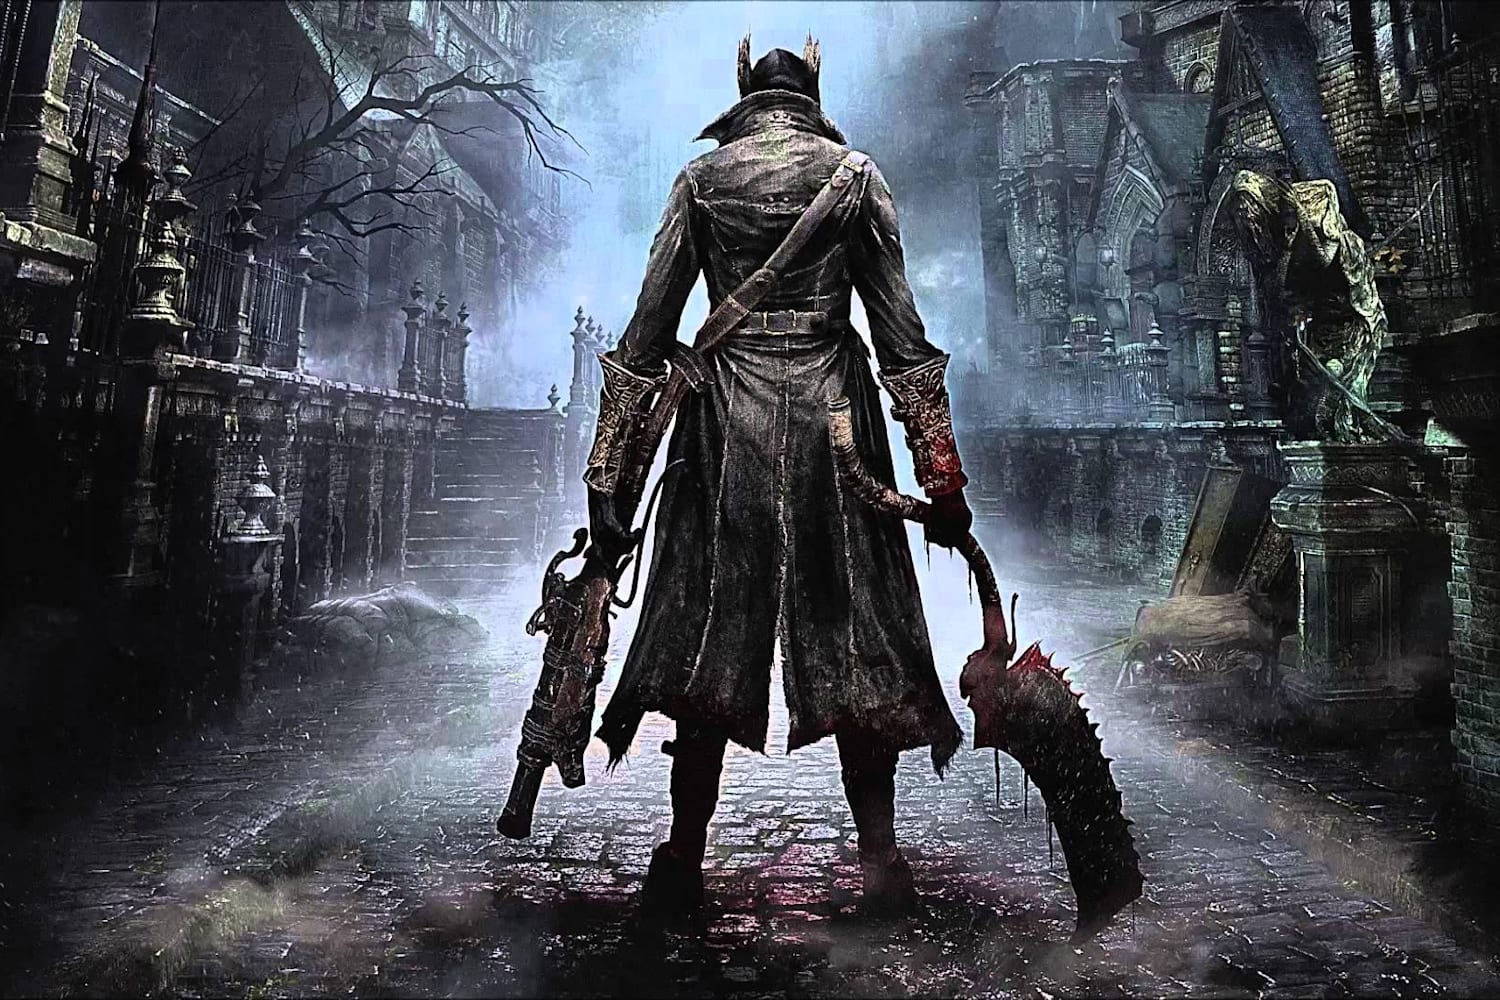 Final Fantasy 16 devs worked on a cancelled IP very similar to Bloodborne